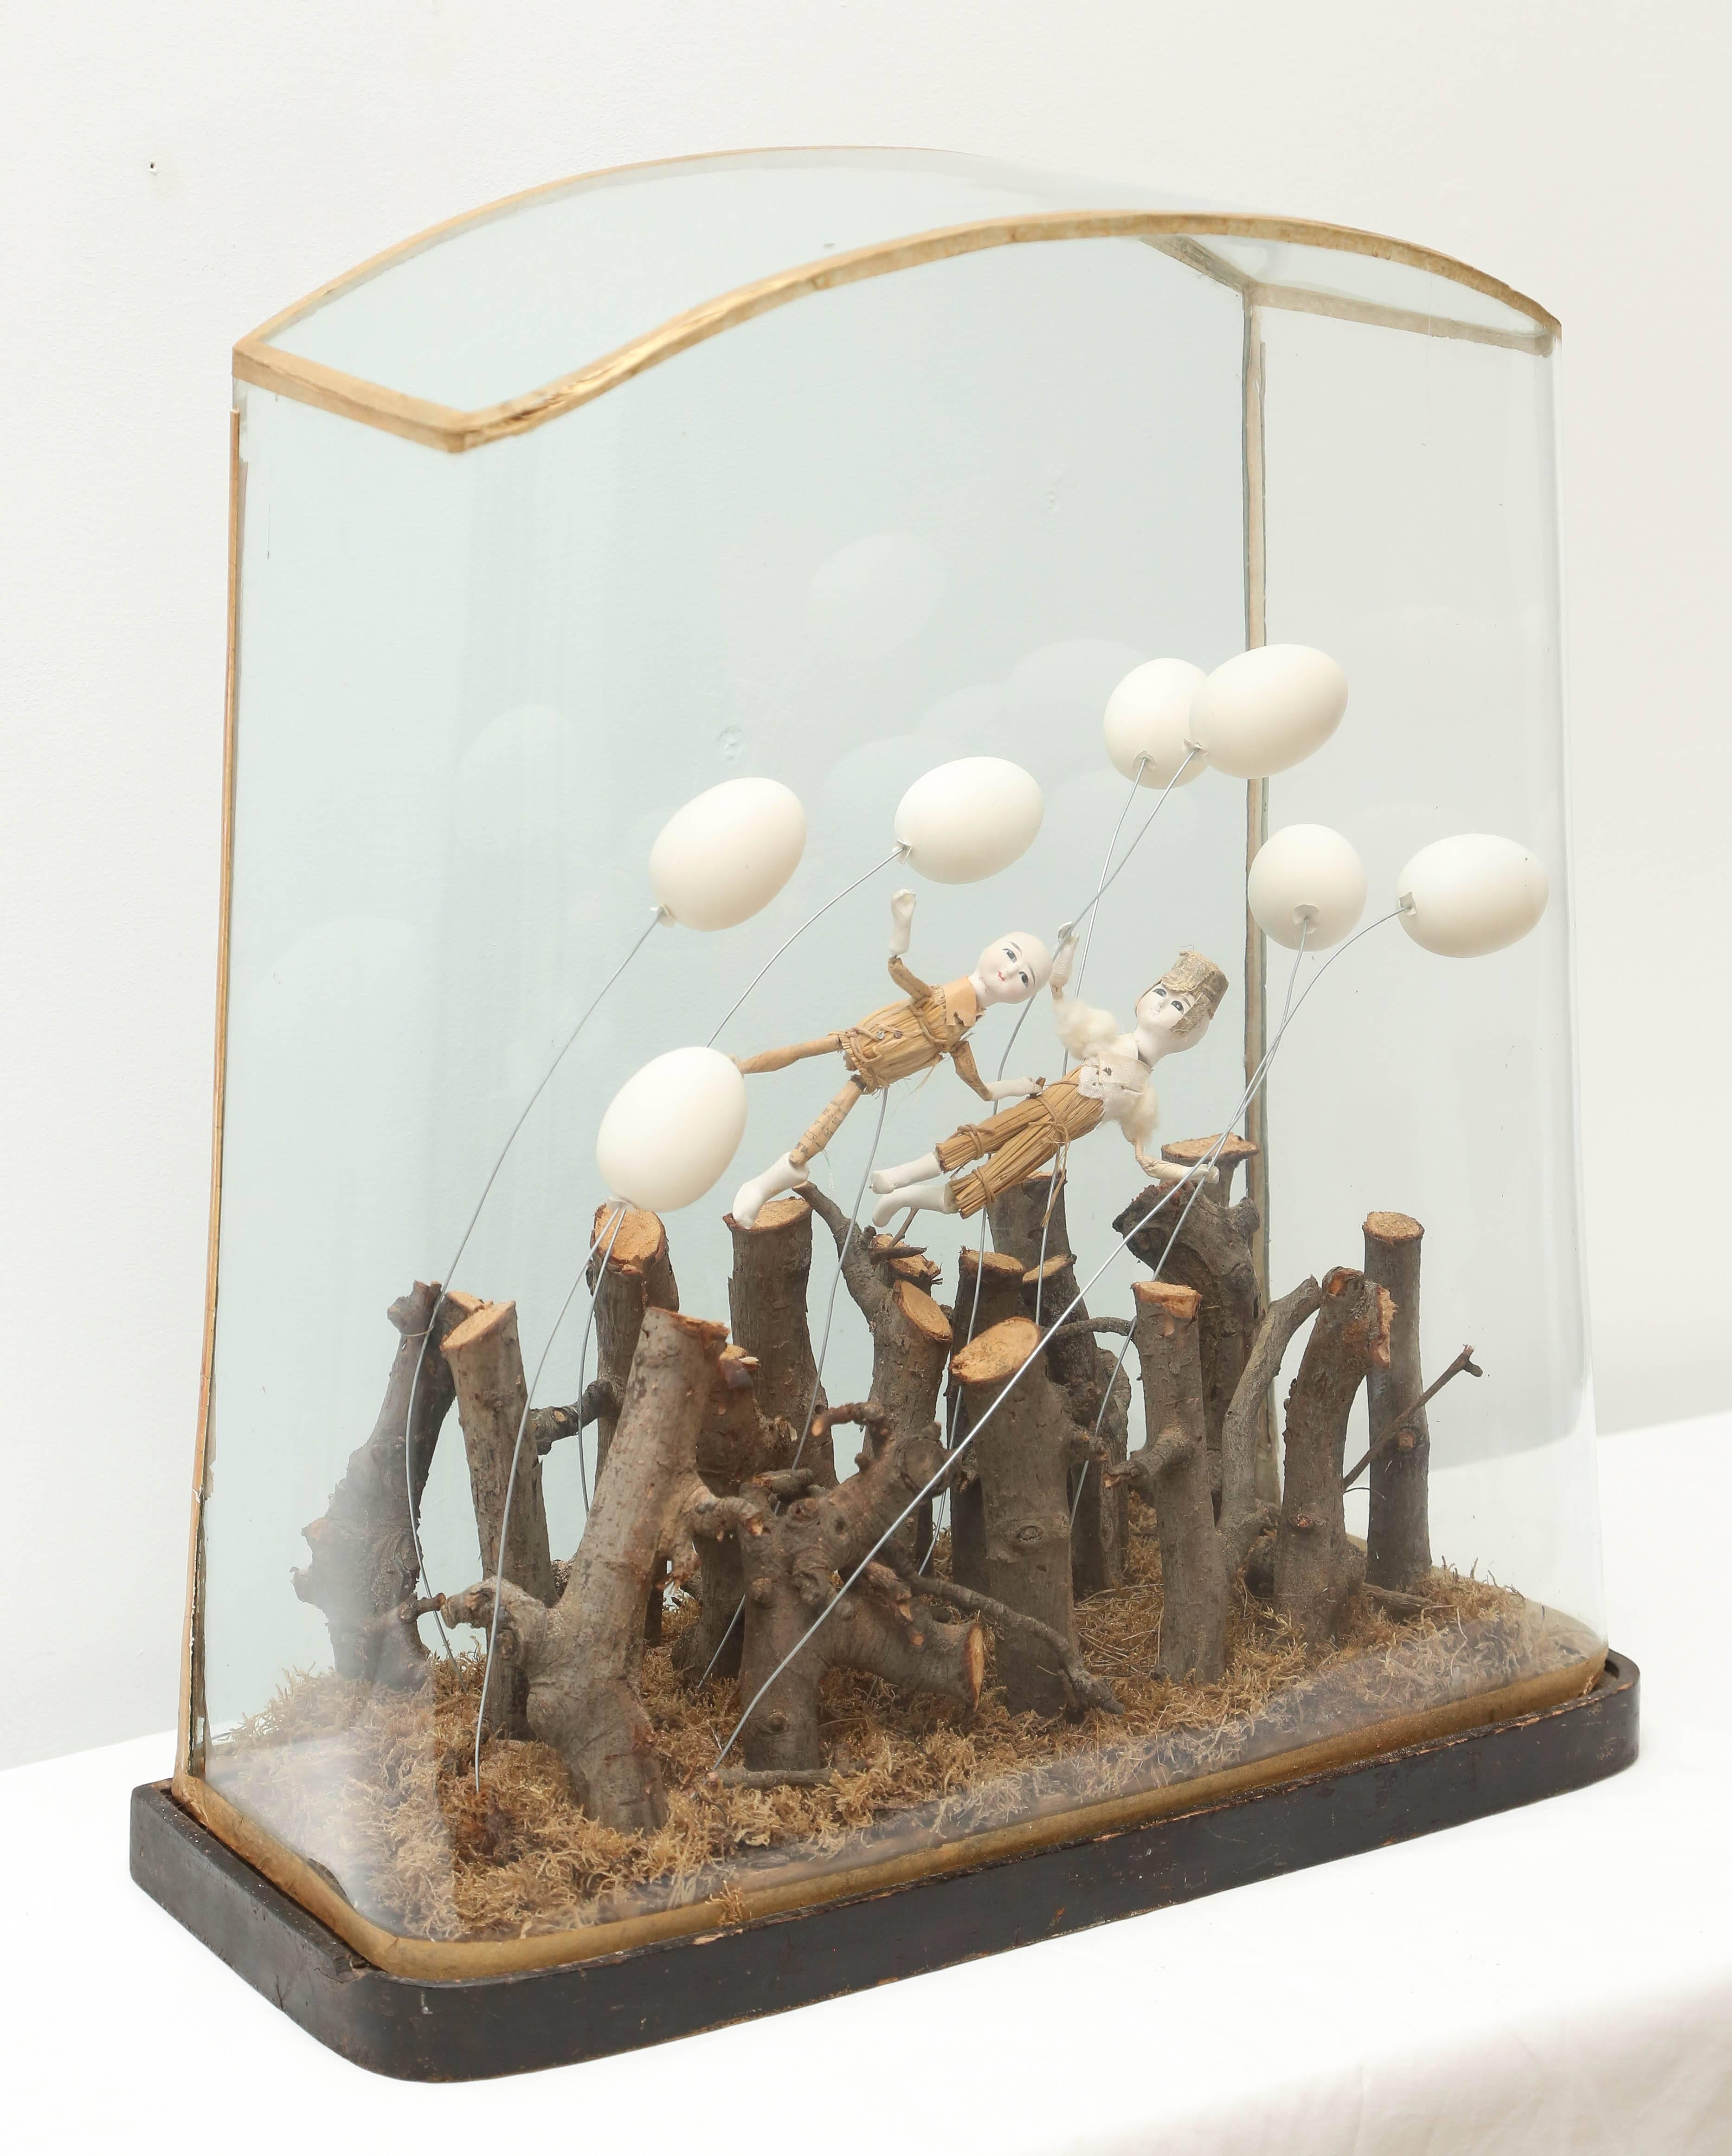 Whimsical fantasy of dolls drifting afloat with balloons of eggshell, encased in a glass display. The sculpture was made by a French artist and is unsigned.